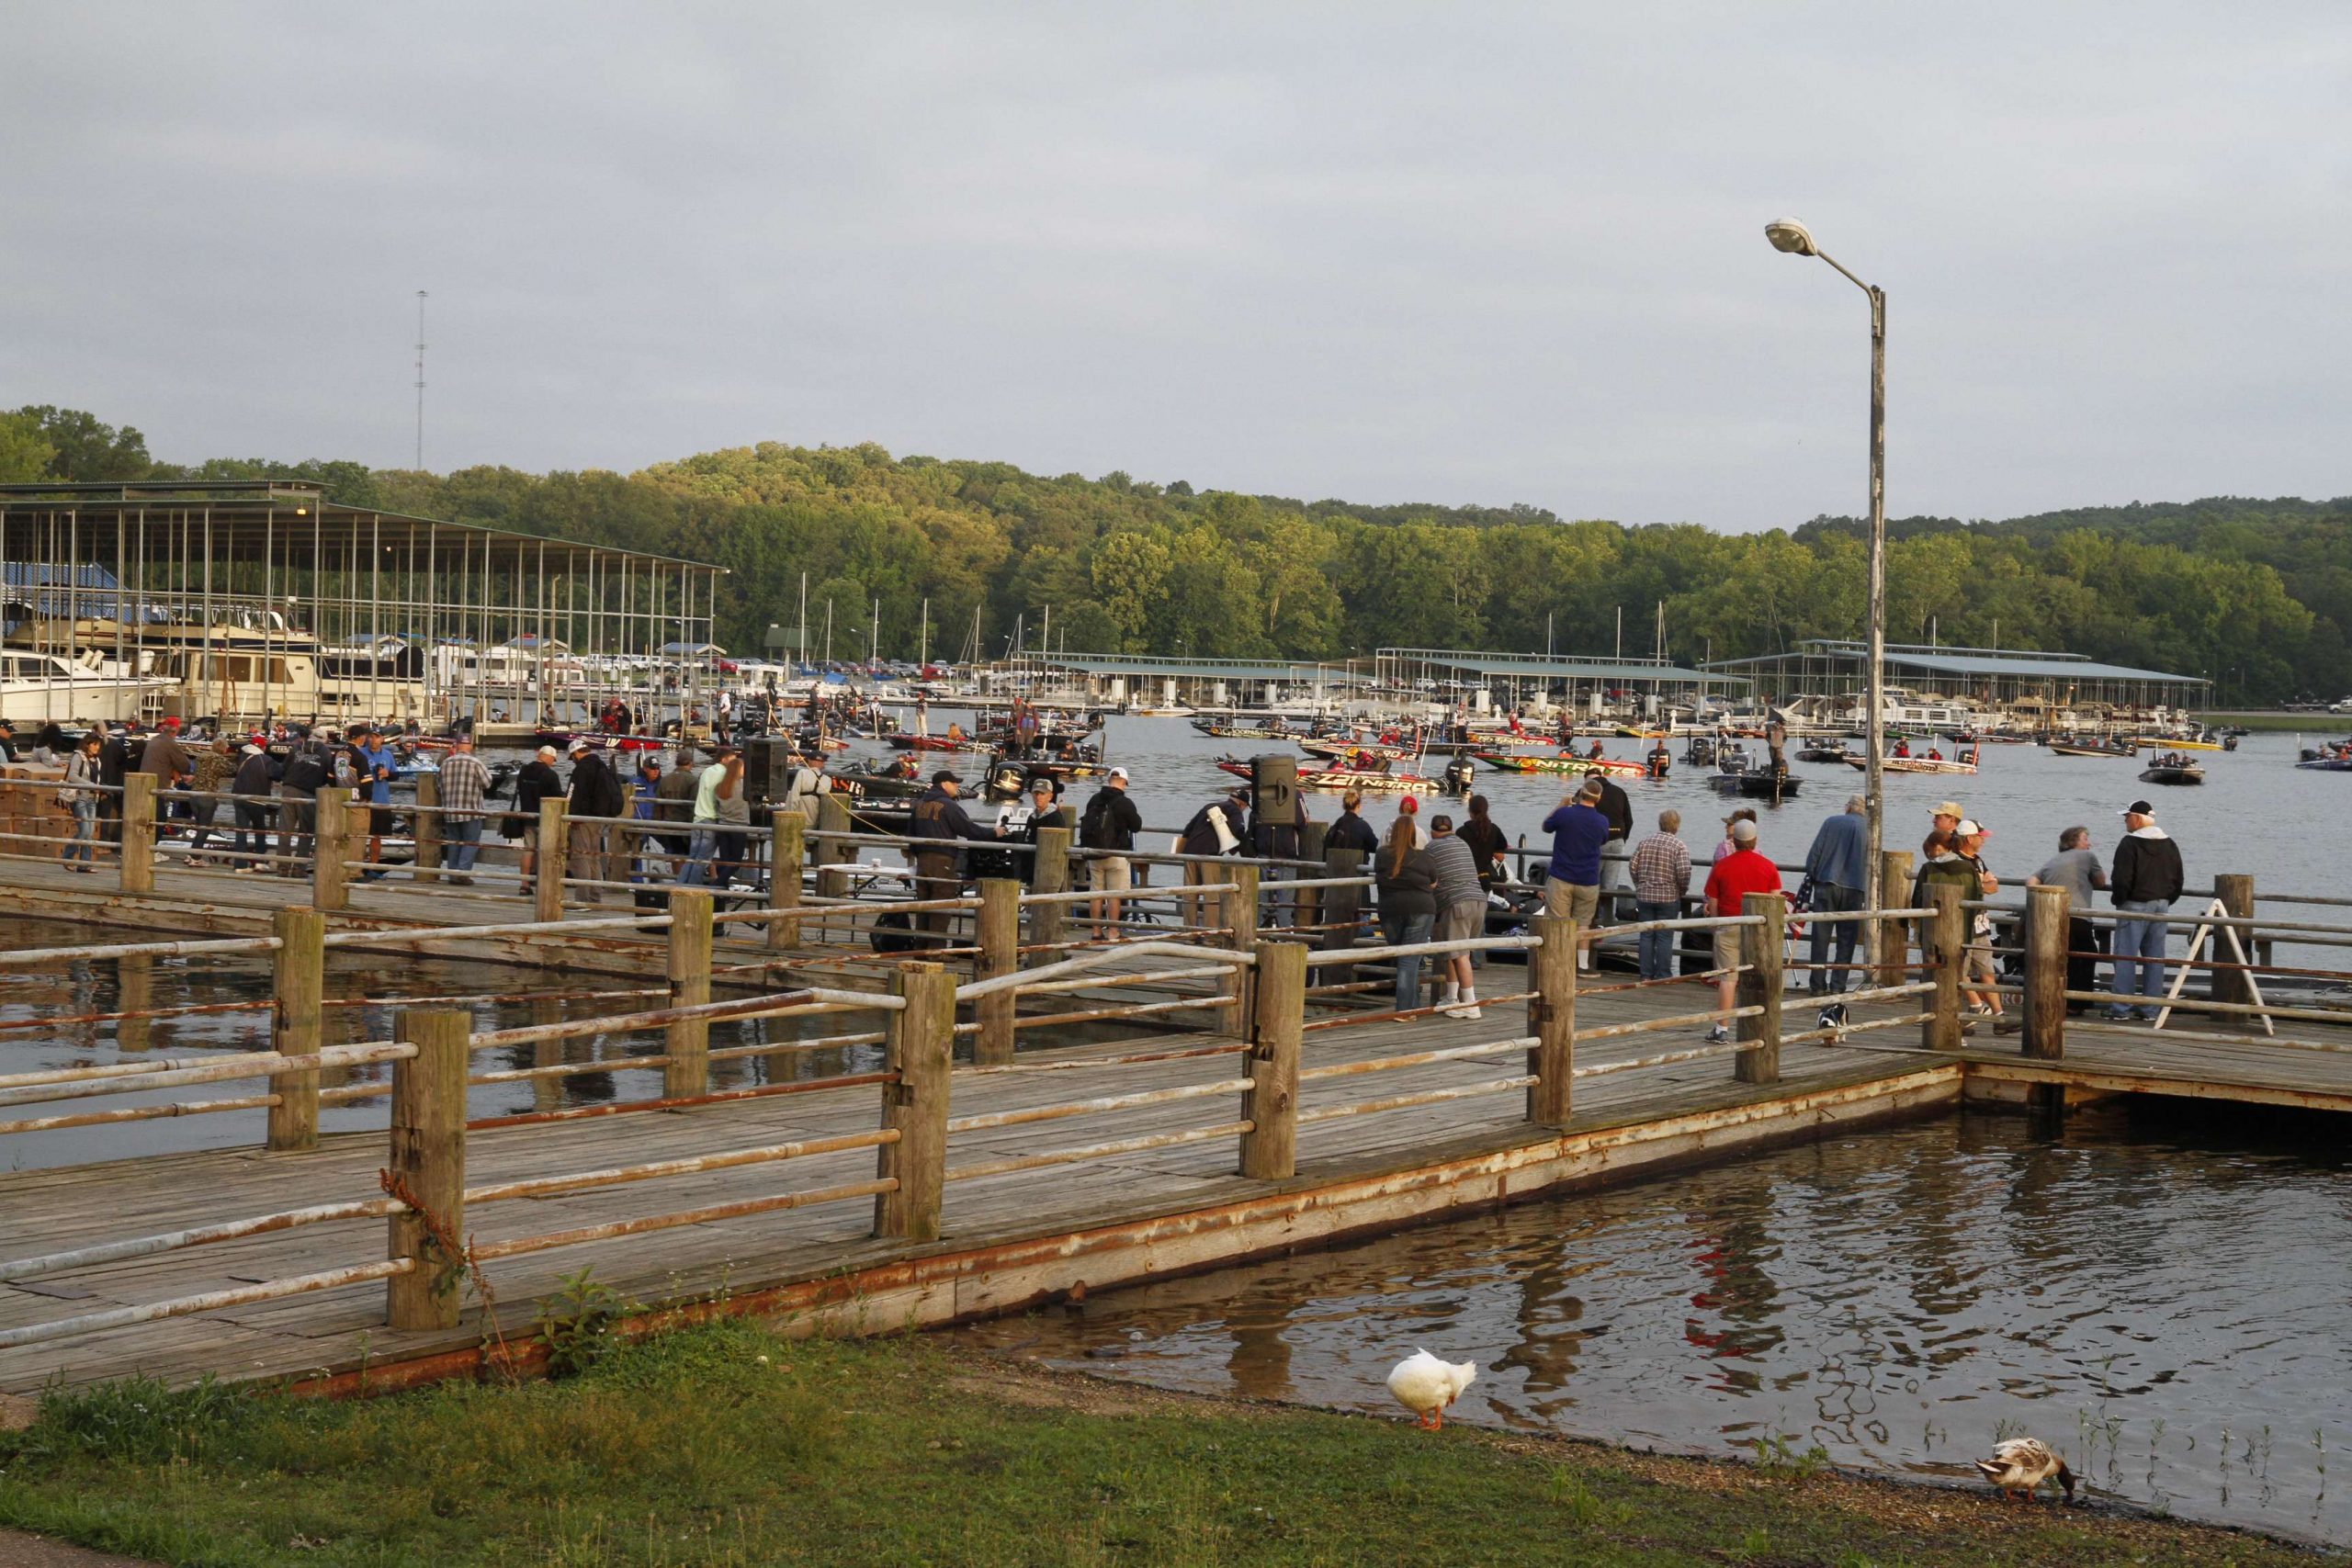 The pier begins to get crowded.